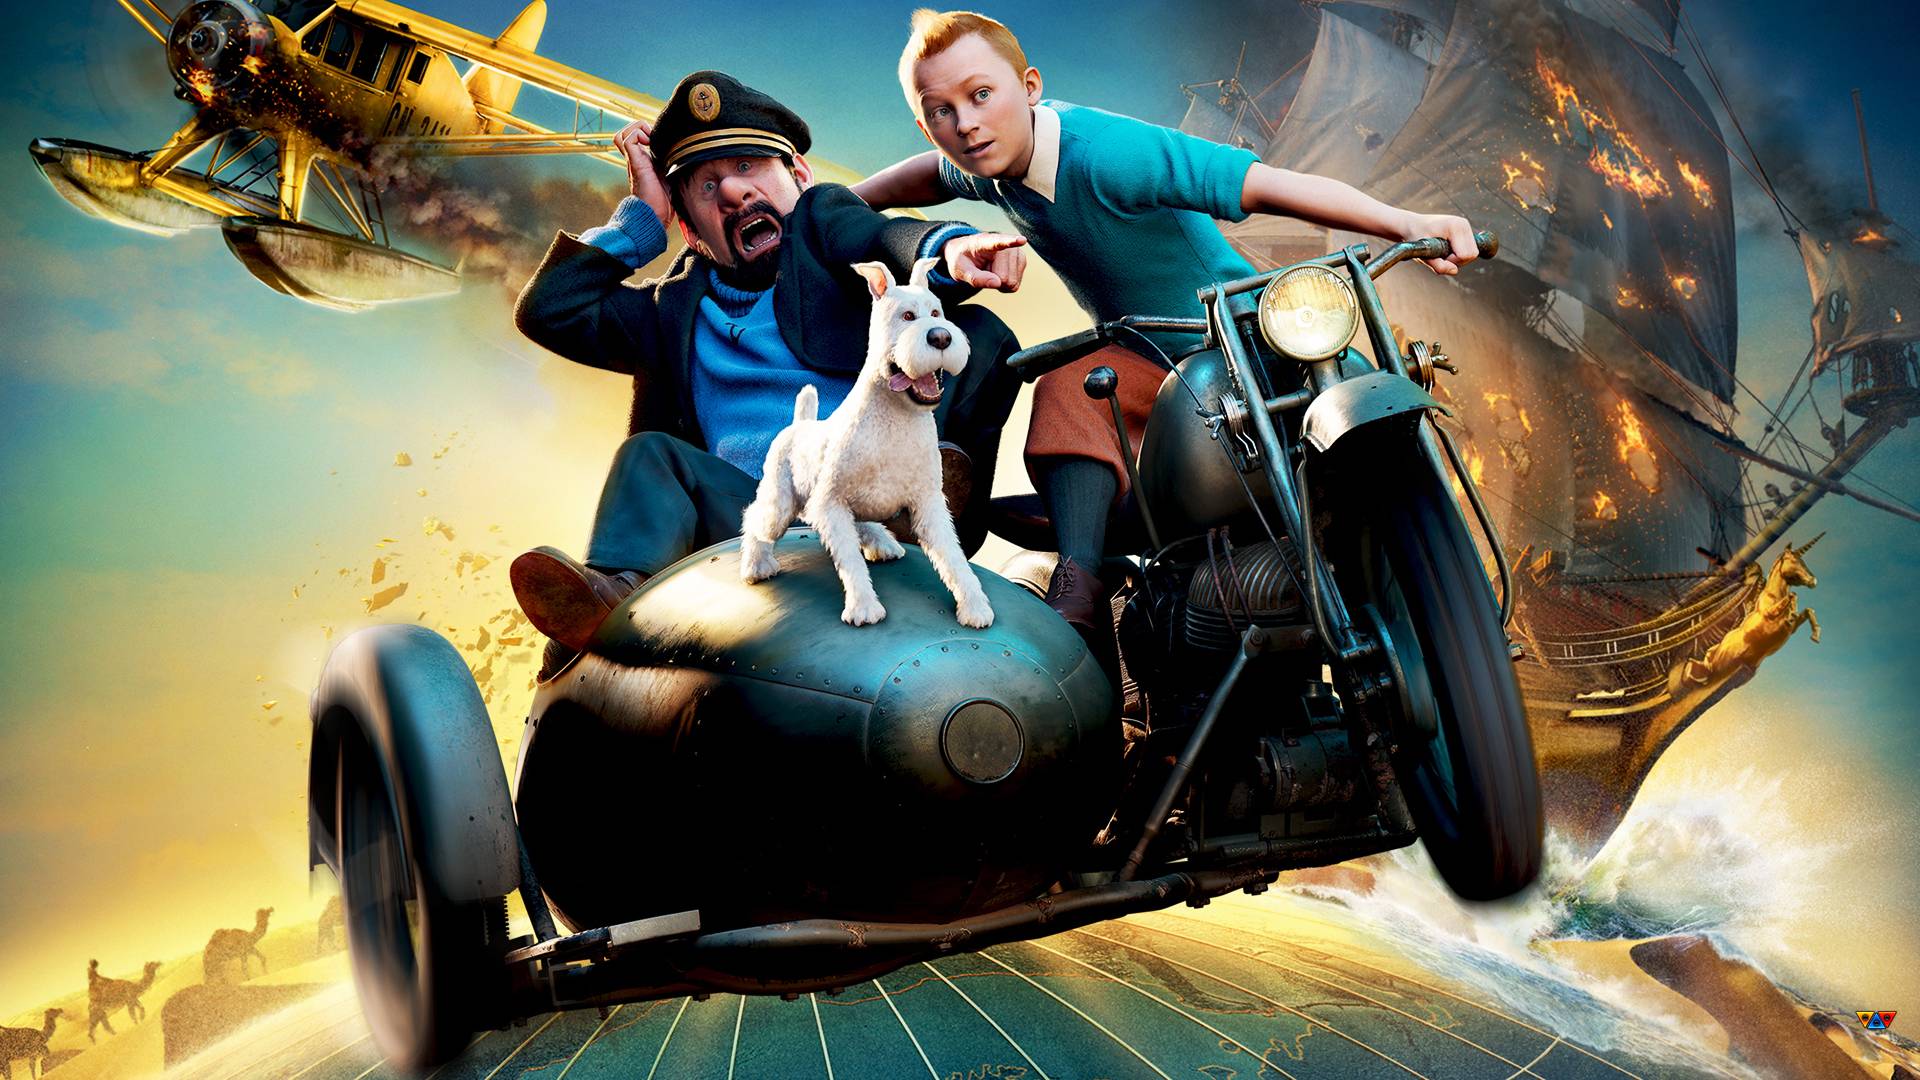 Tintin and Friends Exclusive HD Wallpaper #